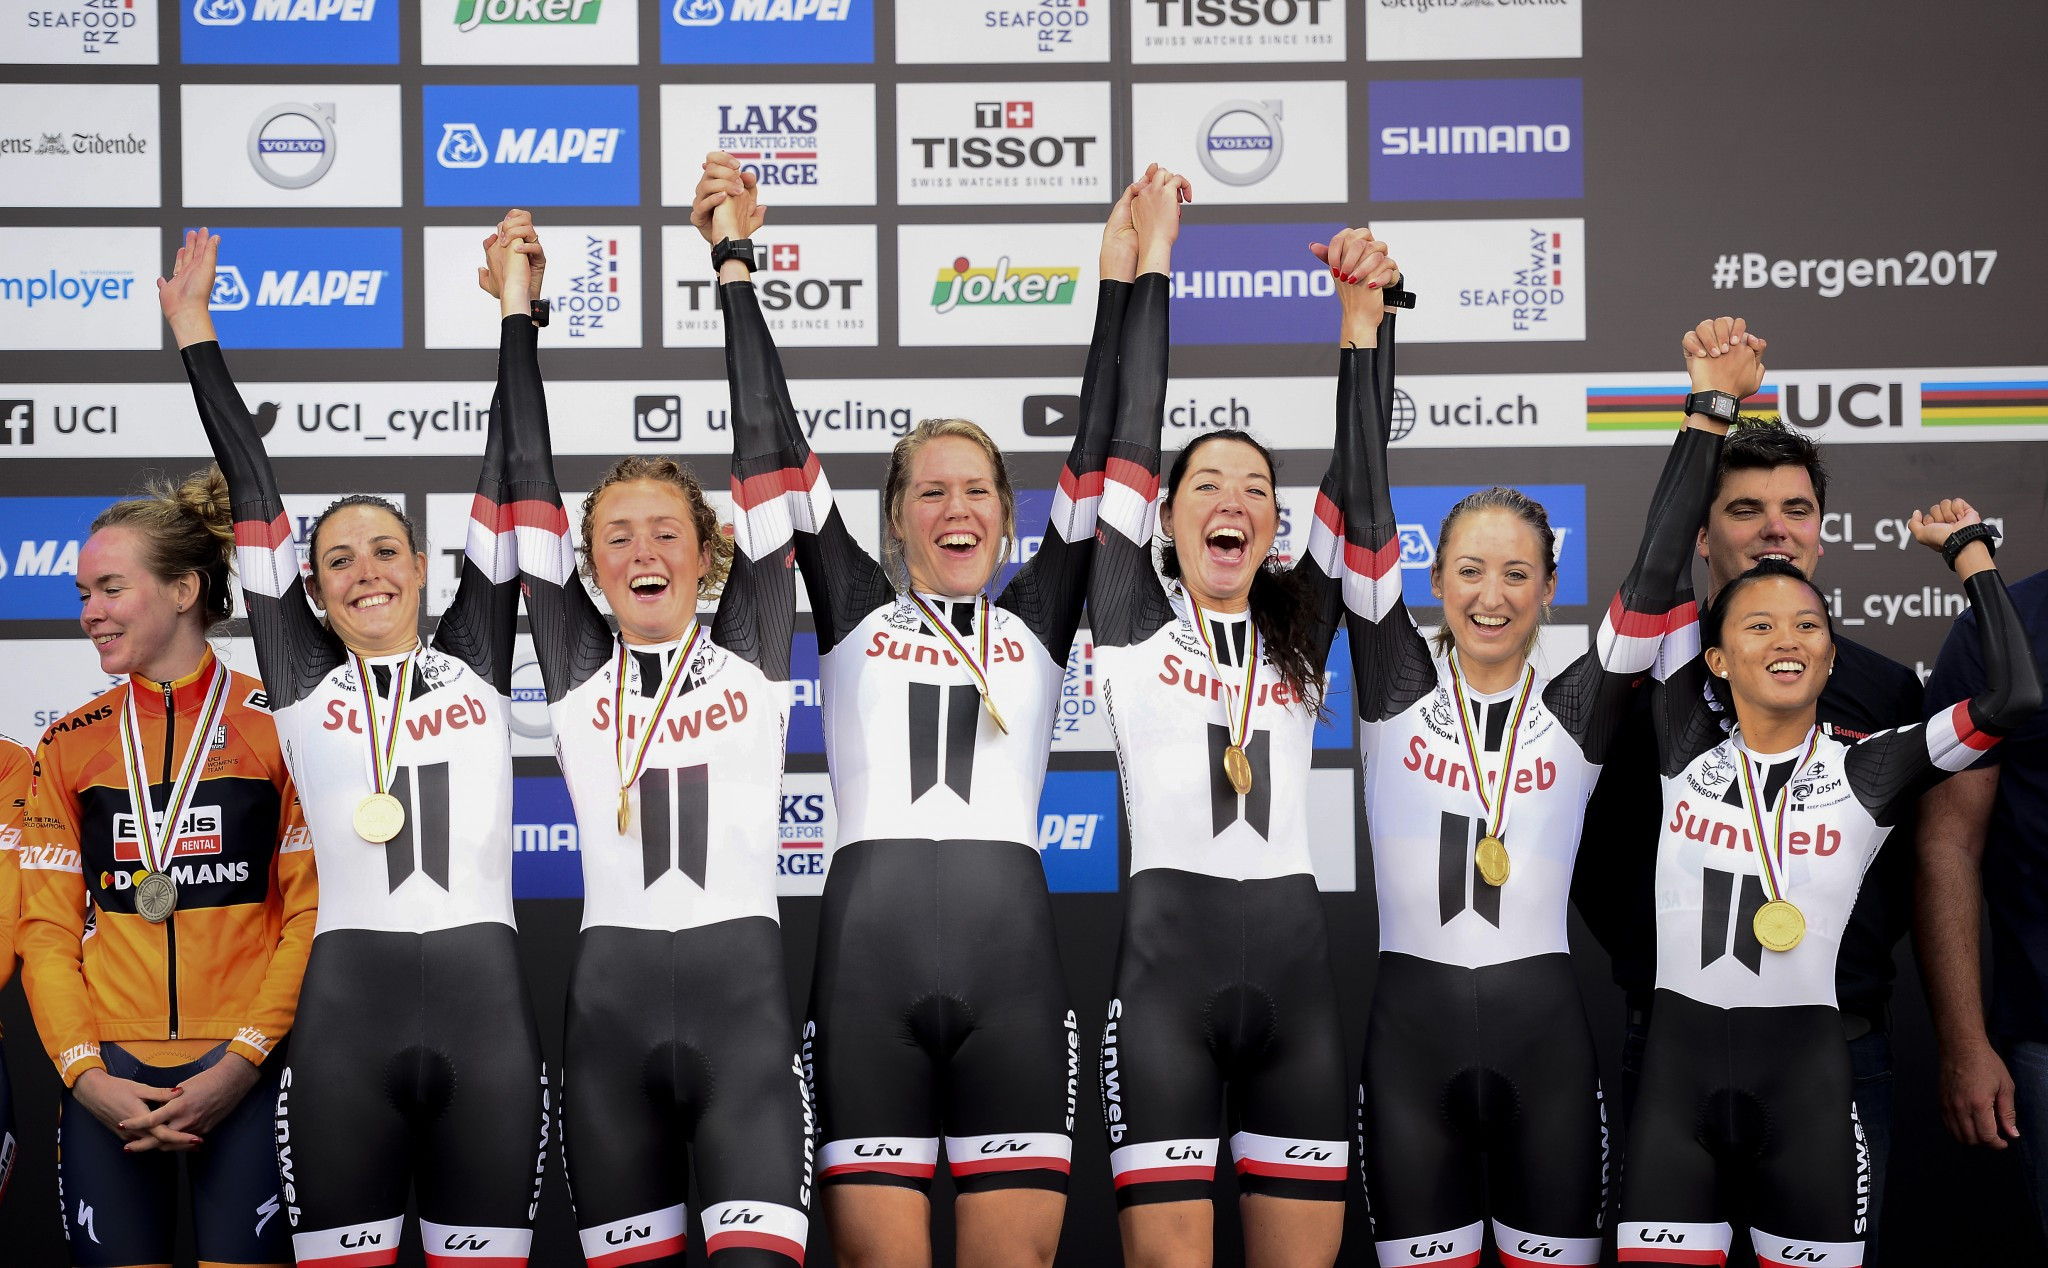 Team Sunweb celebrated double gold in the team time trials ©Getty Images